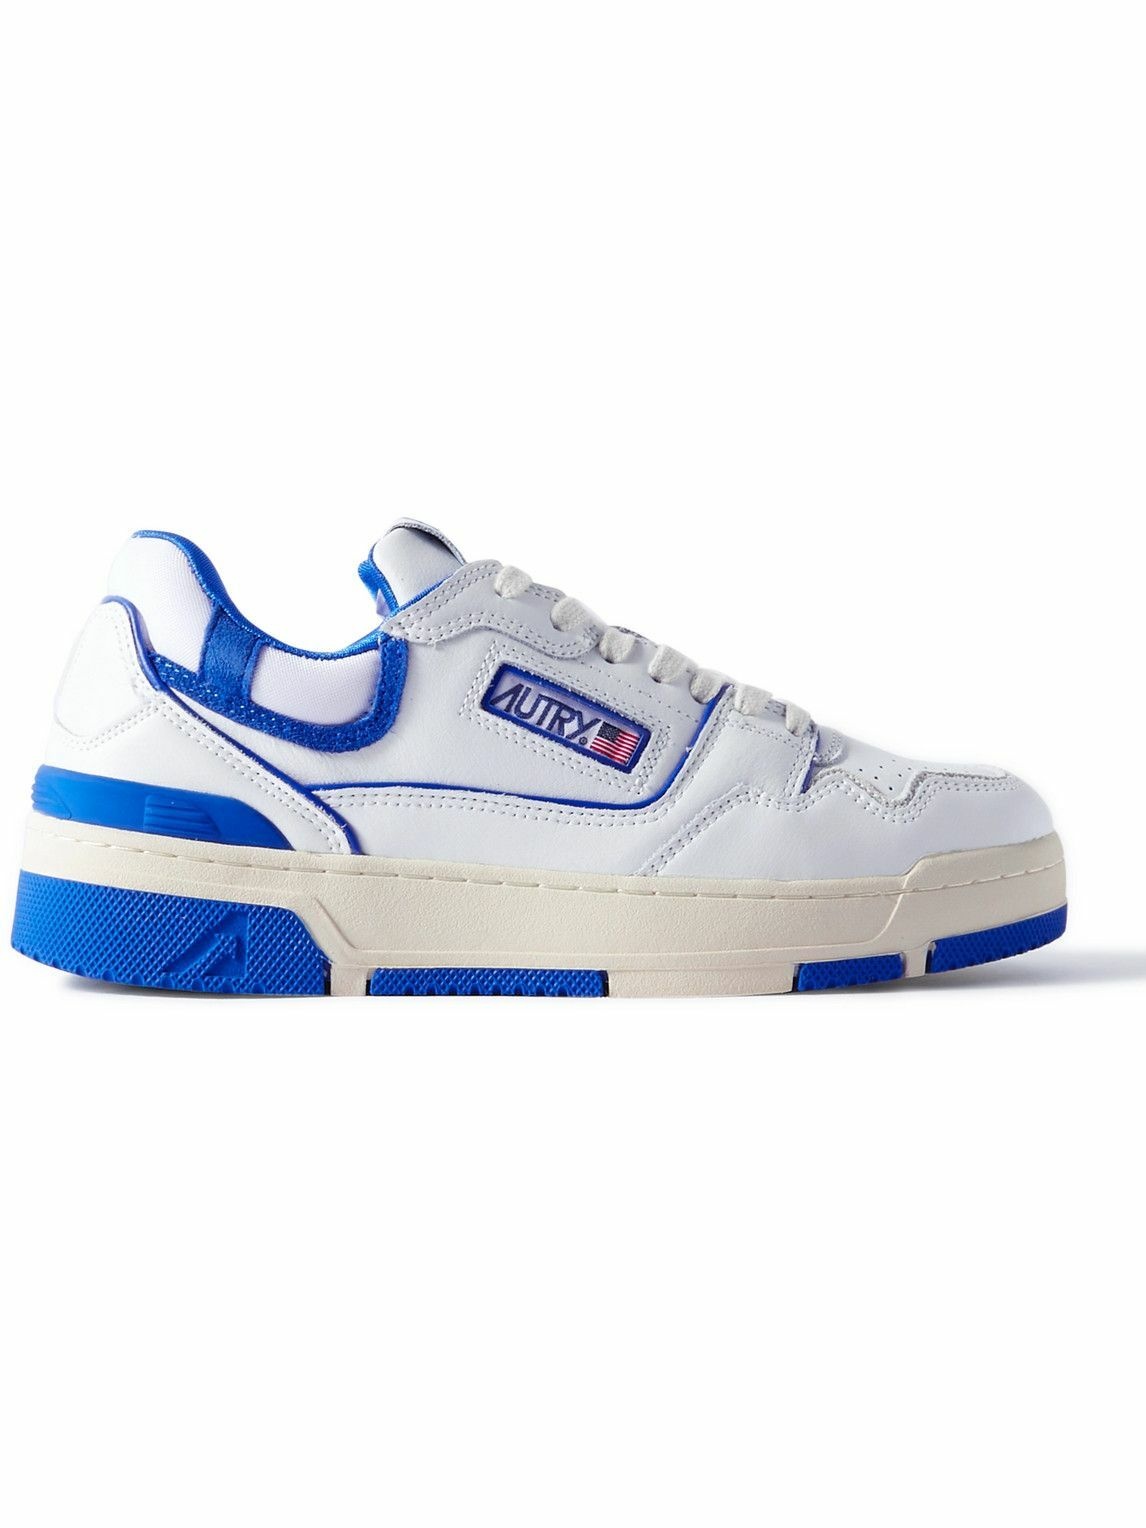 Autry - CLC Suede and Rubber-Trimmed Leather Sneakers - Blue Autry